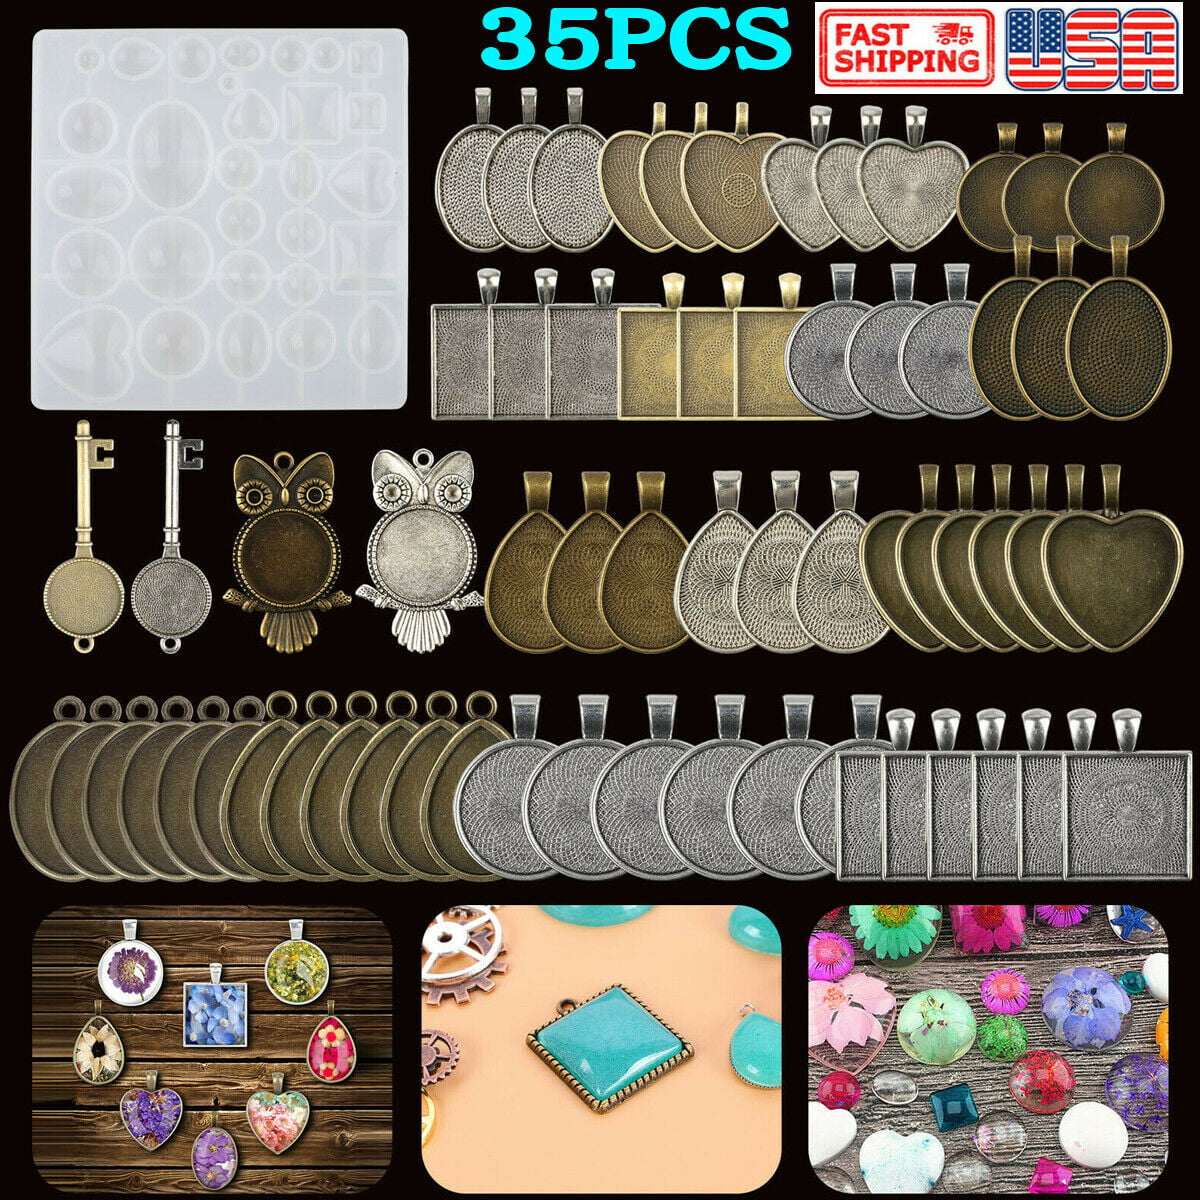 35Pcs/Set Resin Jewelry Casting Silicone Mold DIY Crafting Pendant Trays Making 